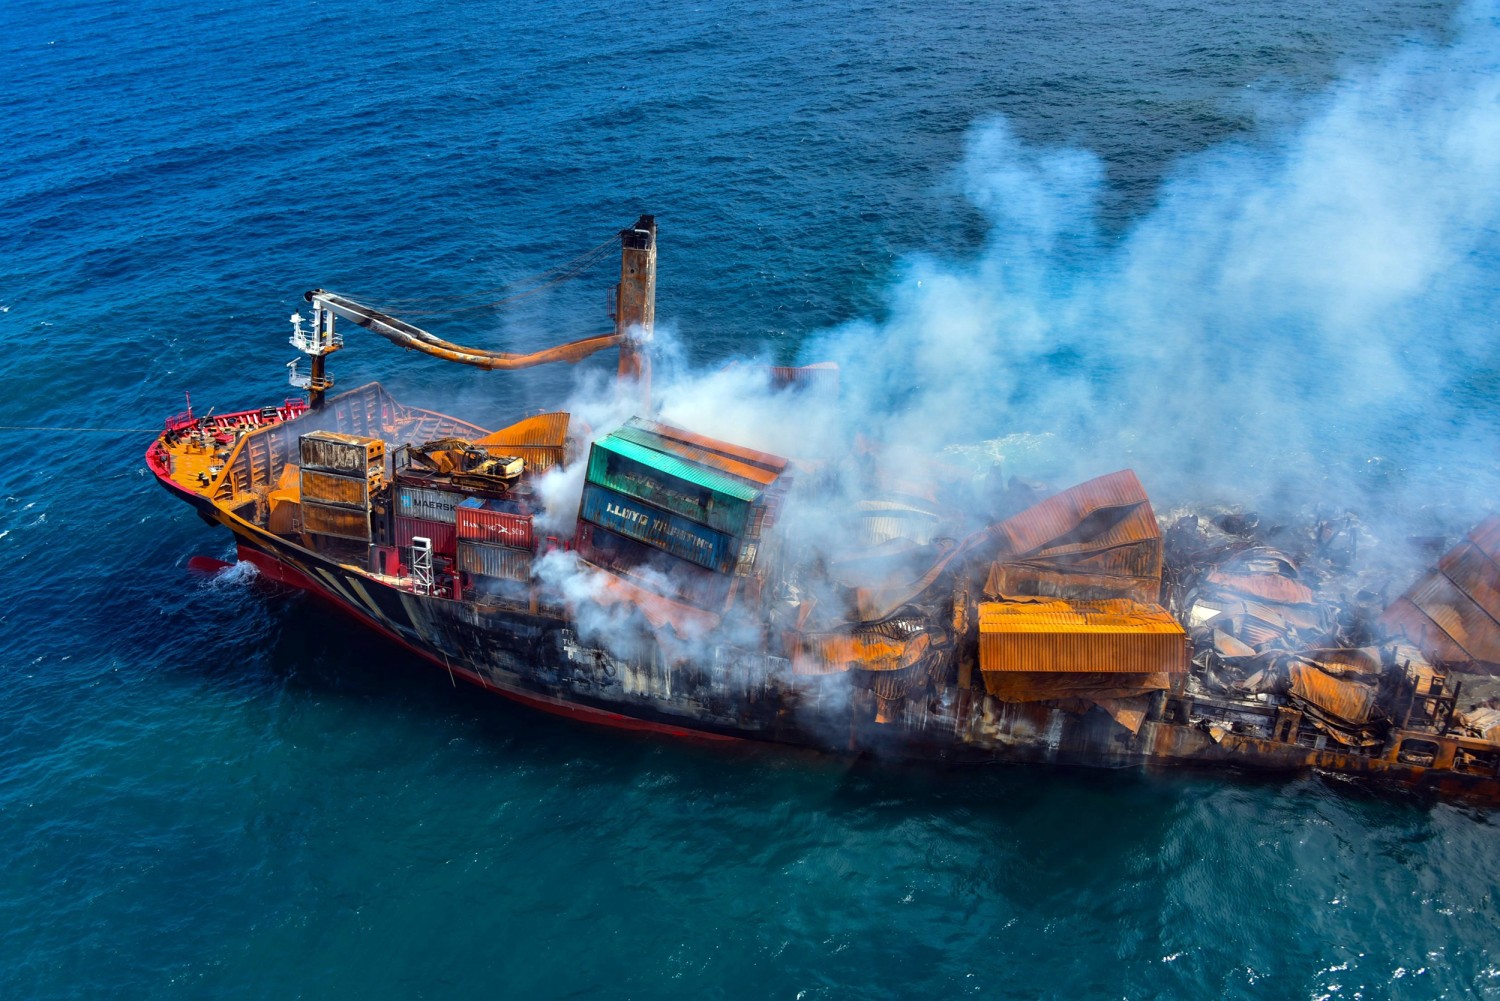 Cargo ship sinks off Sri Lanka after weeks on fire, sparking fears of  environmental disaster